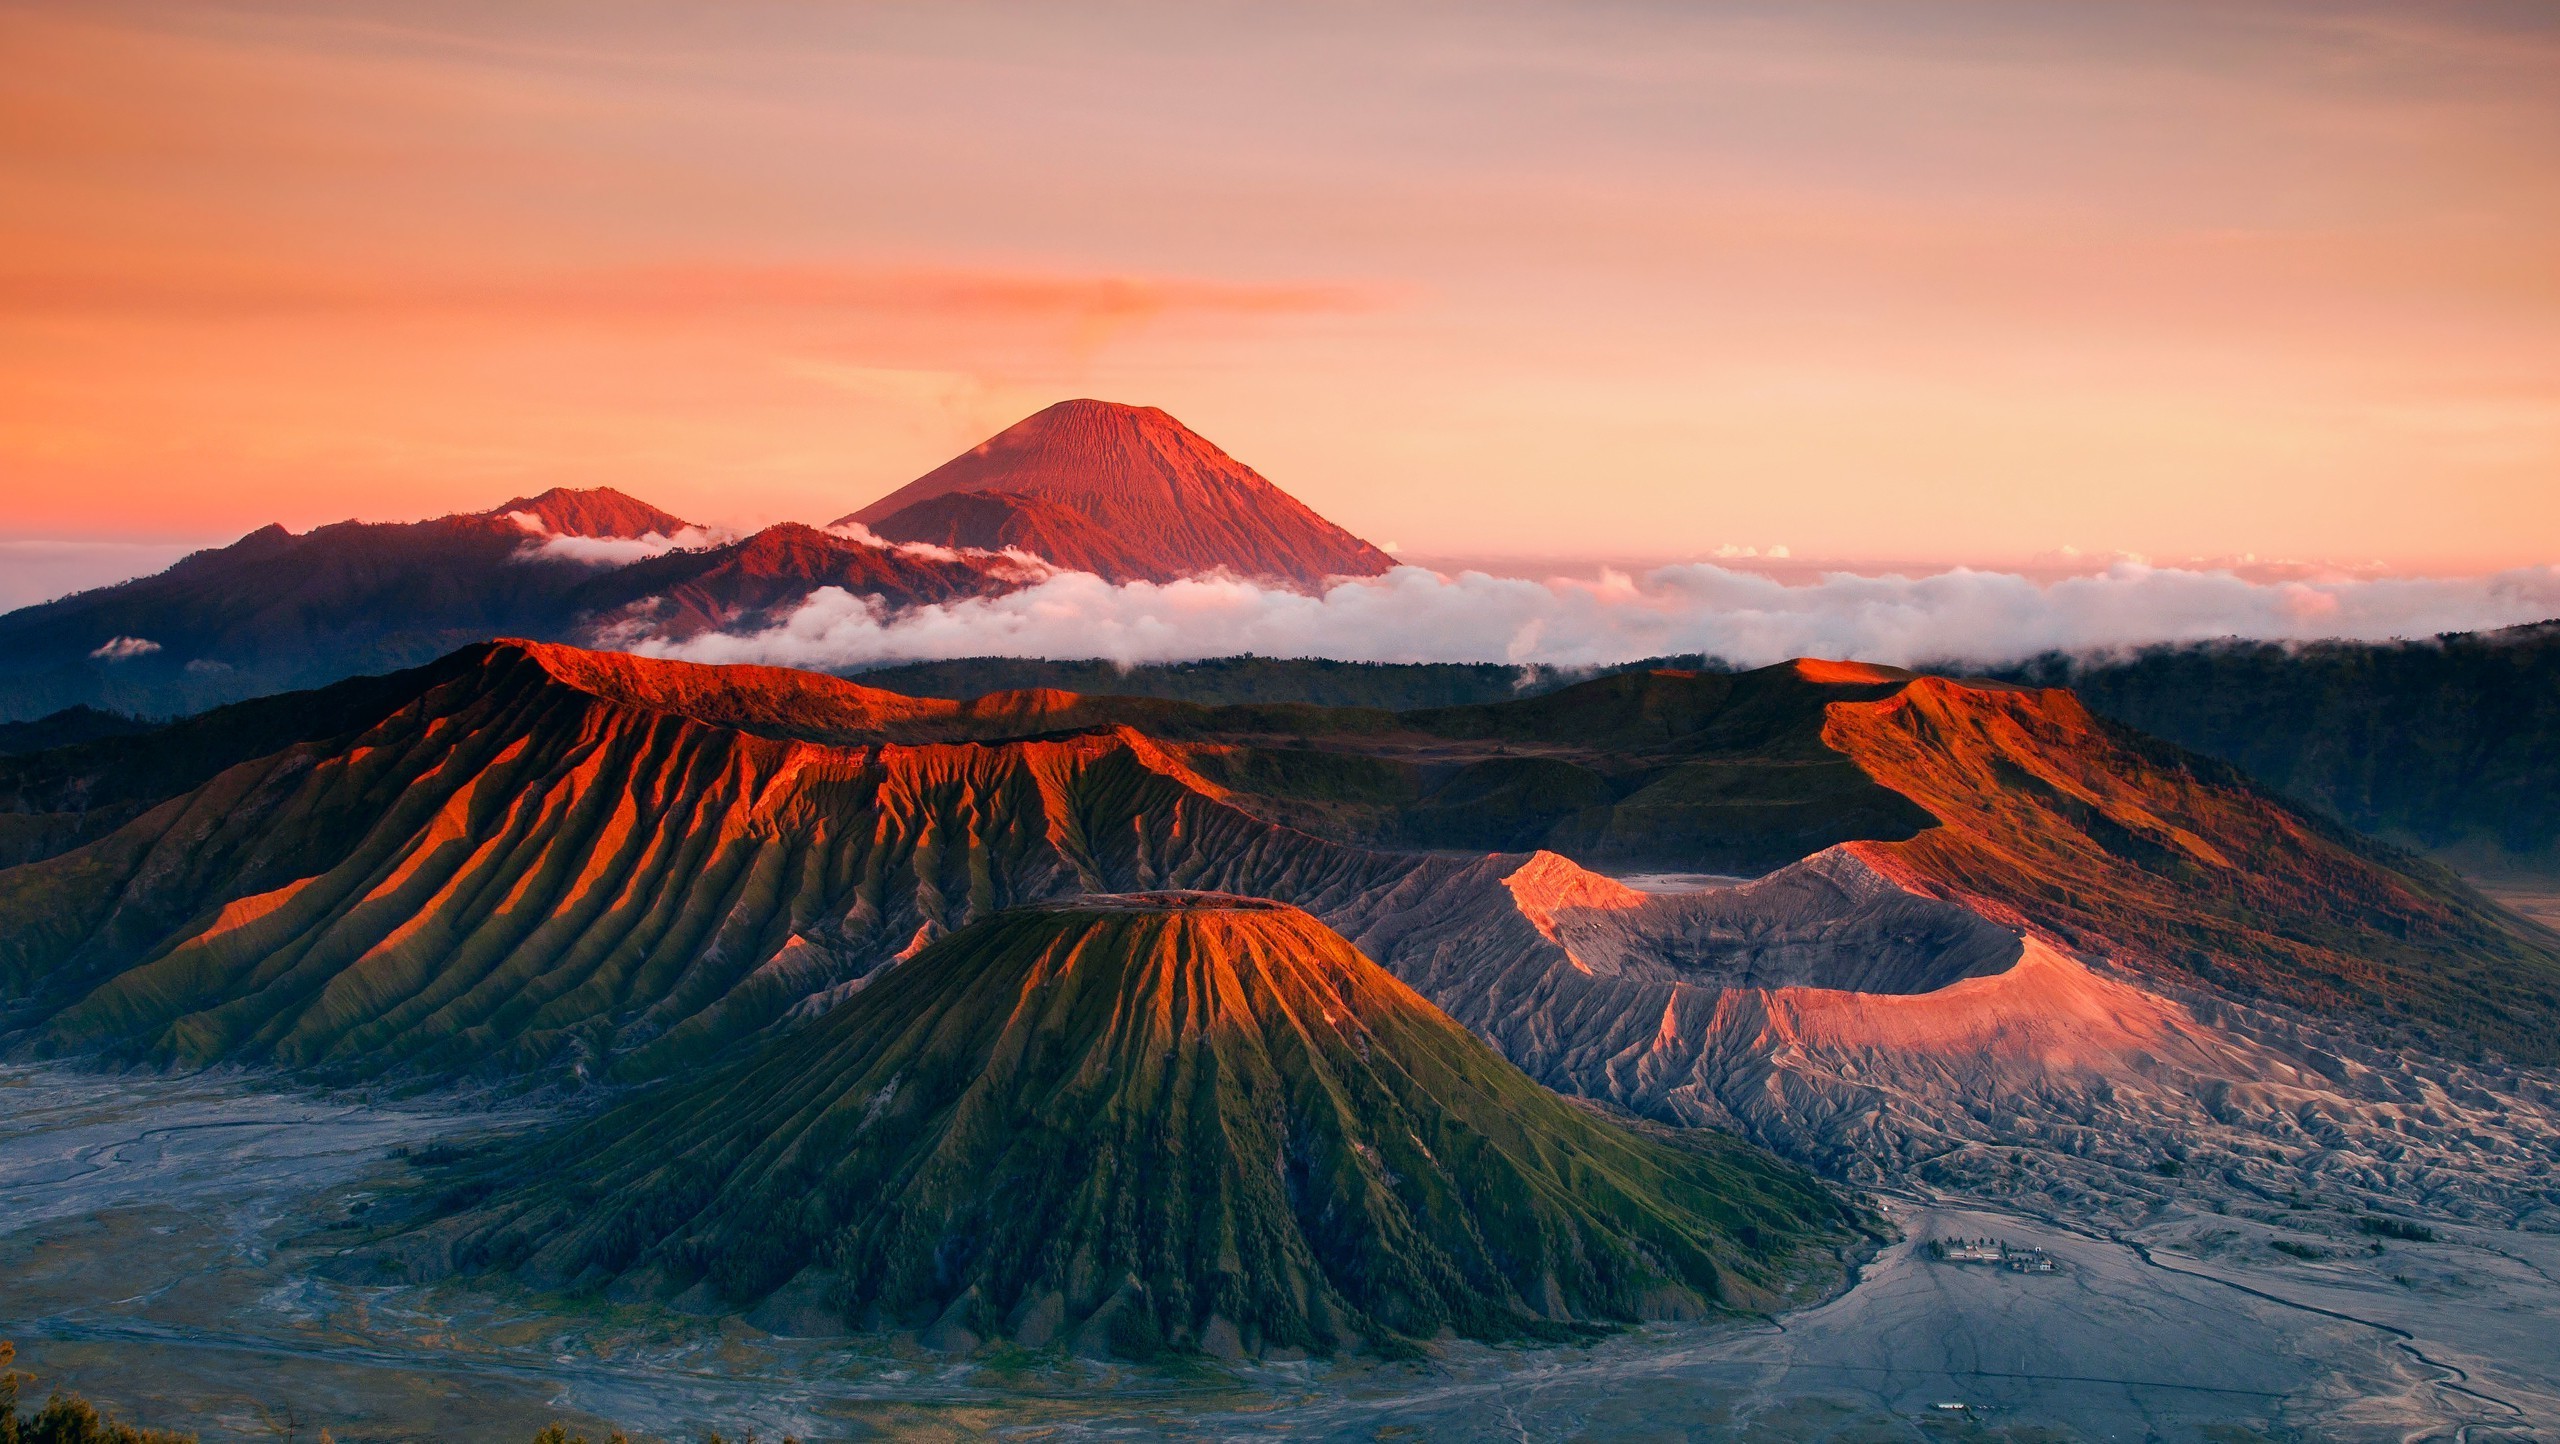 Landscape volcano mountains mount bromo dusk clouds crater indonesia wallpapers hd desktop and mobile backgrounds